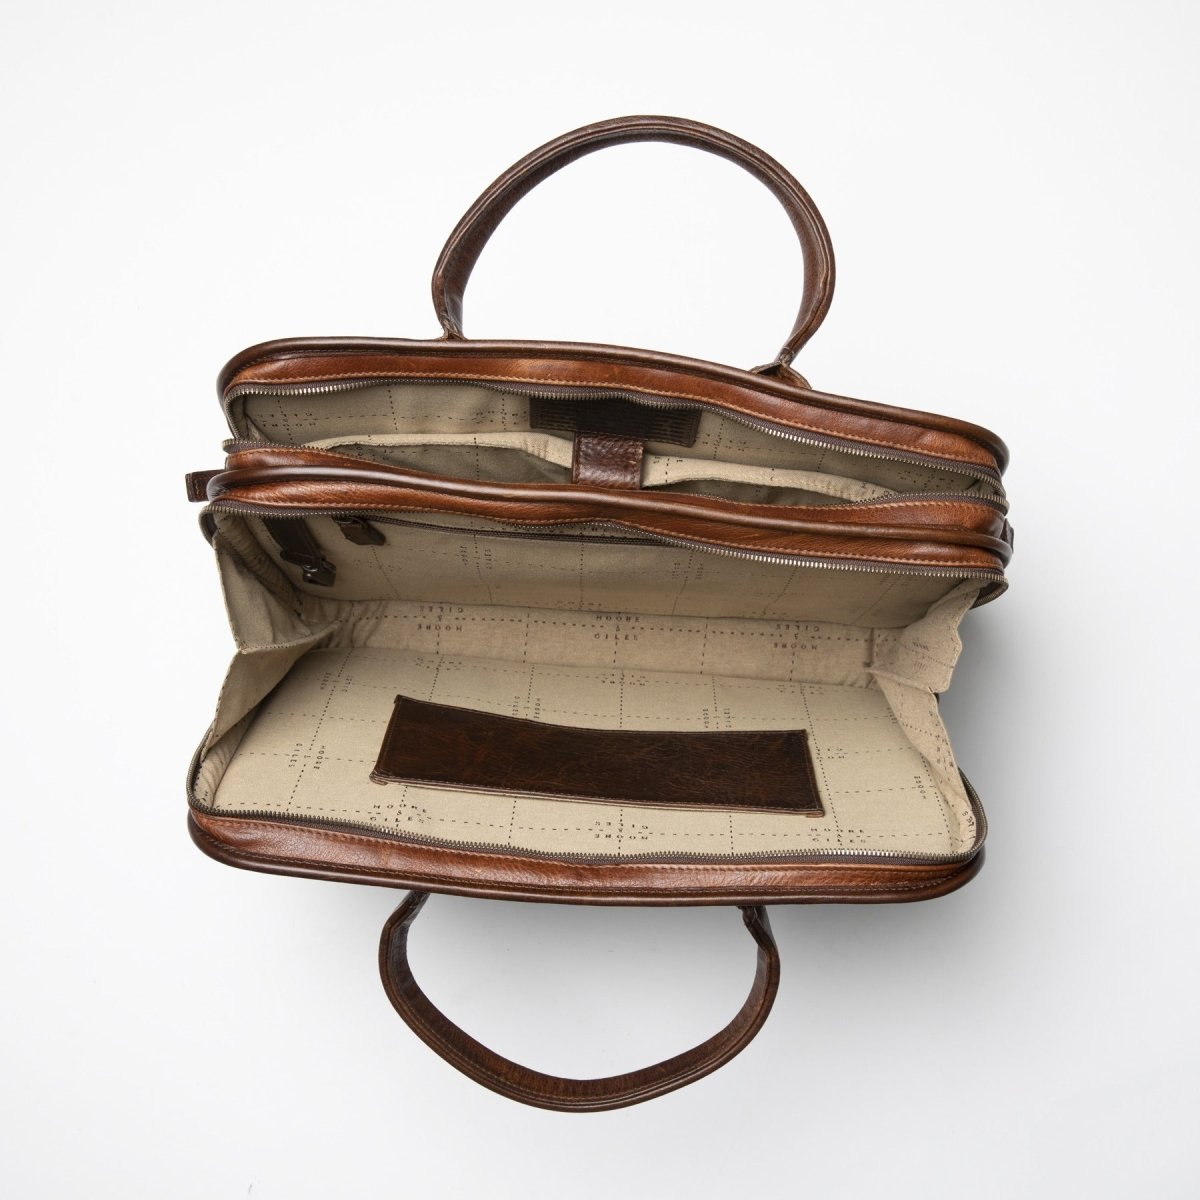 Haythe Commuter Bag - Leather Briefcase by Moore & Giles